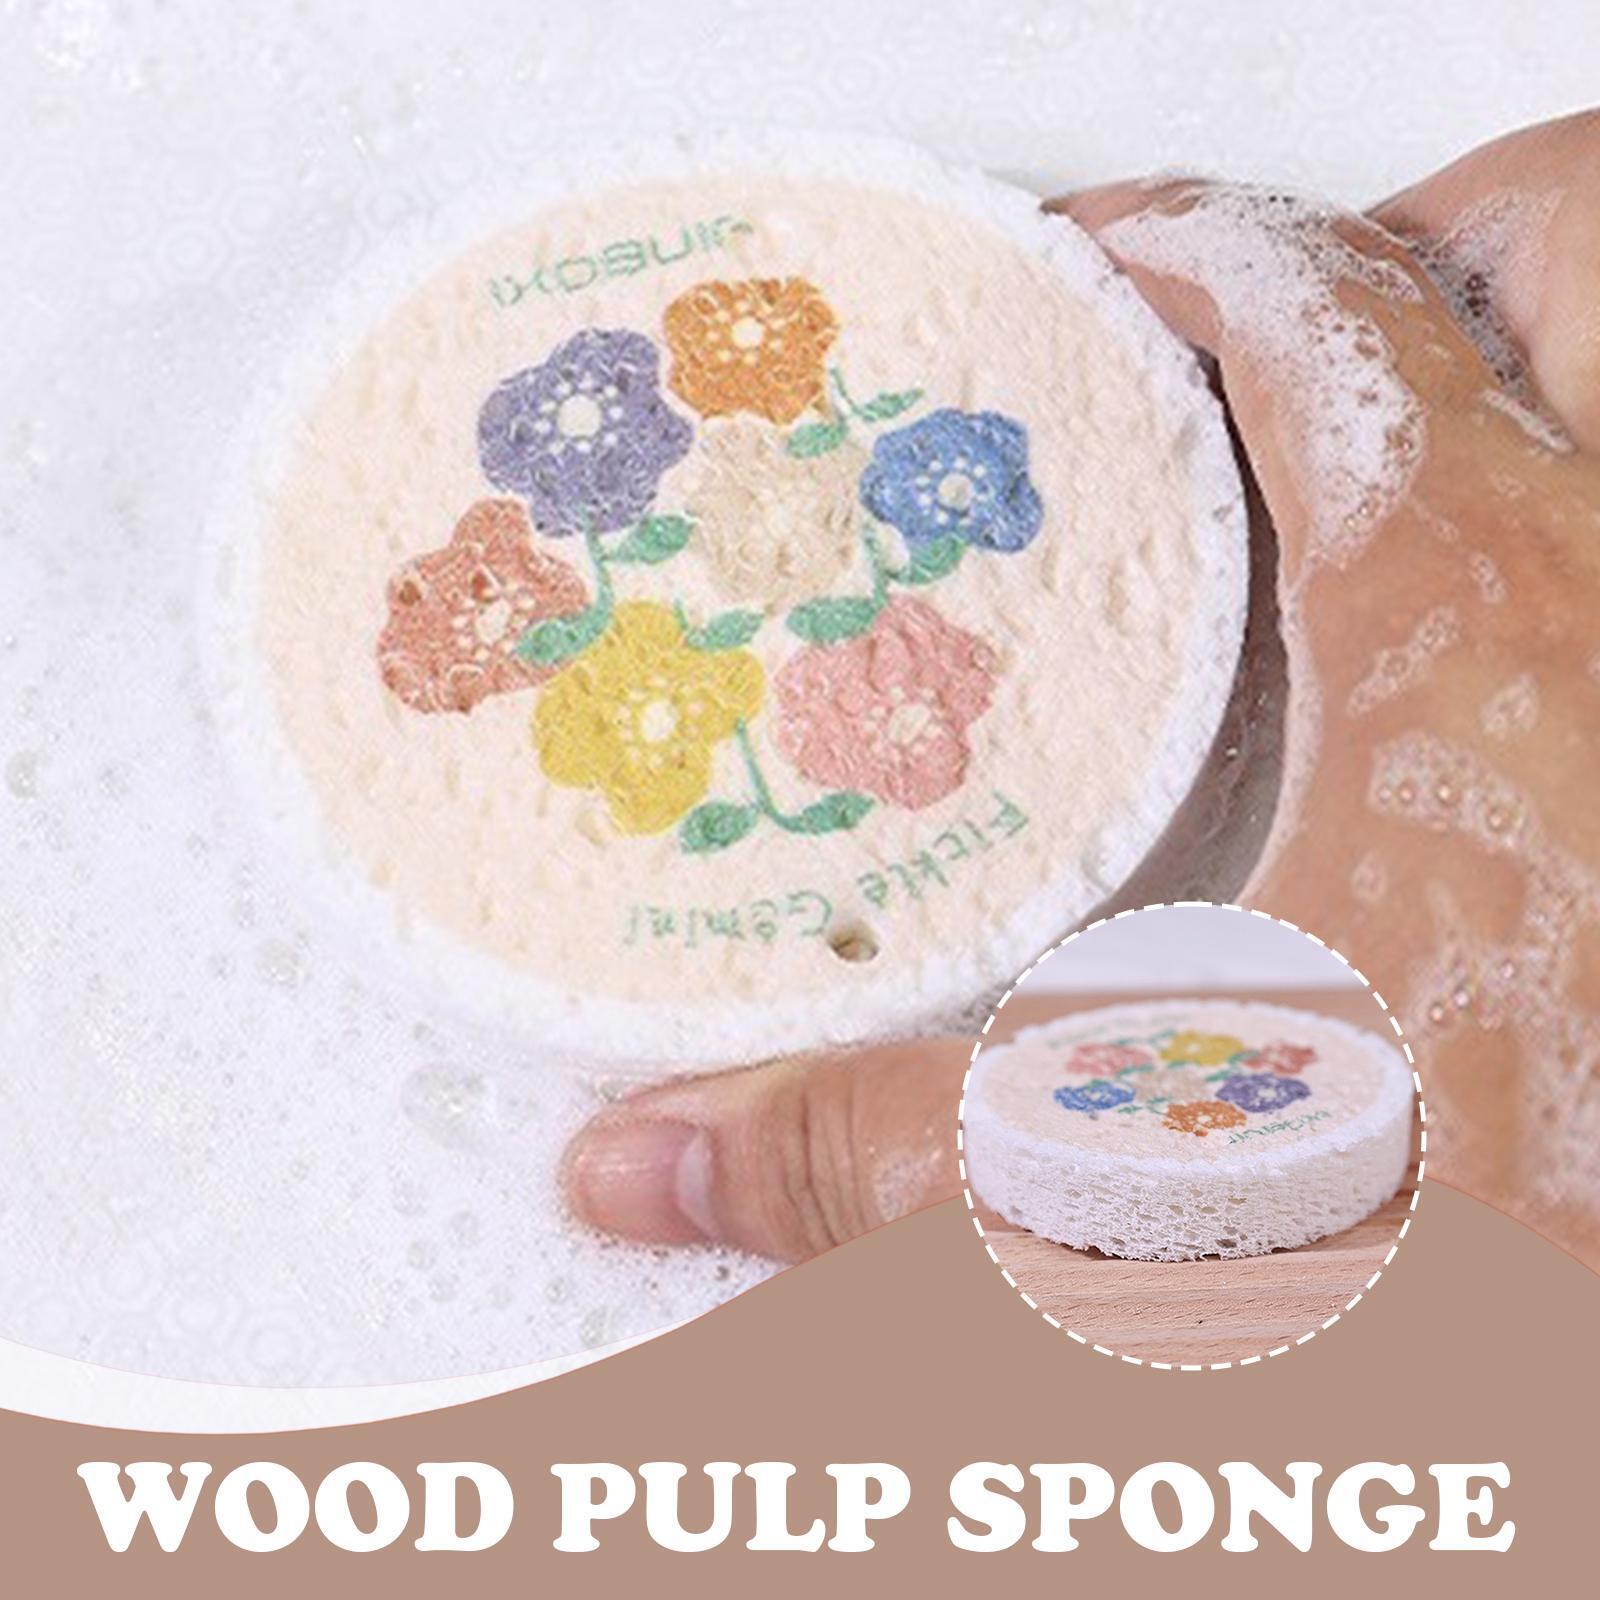 🌸Spring Promotion- SAVE 48% OFF🍀Wood Pulp Sponge🔥🔥Buy 5 (GET 3 FREE)8 PCS & FREE SHIPPING